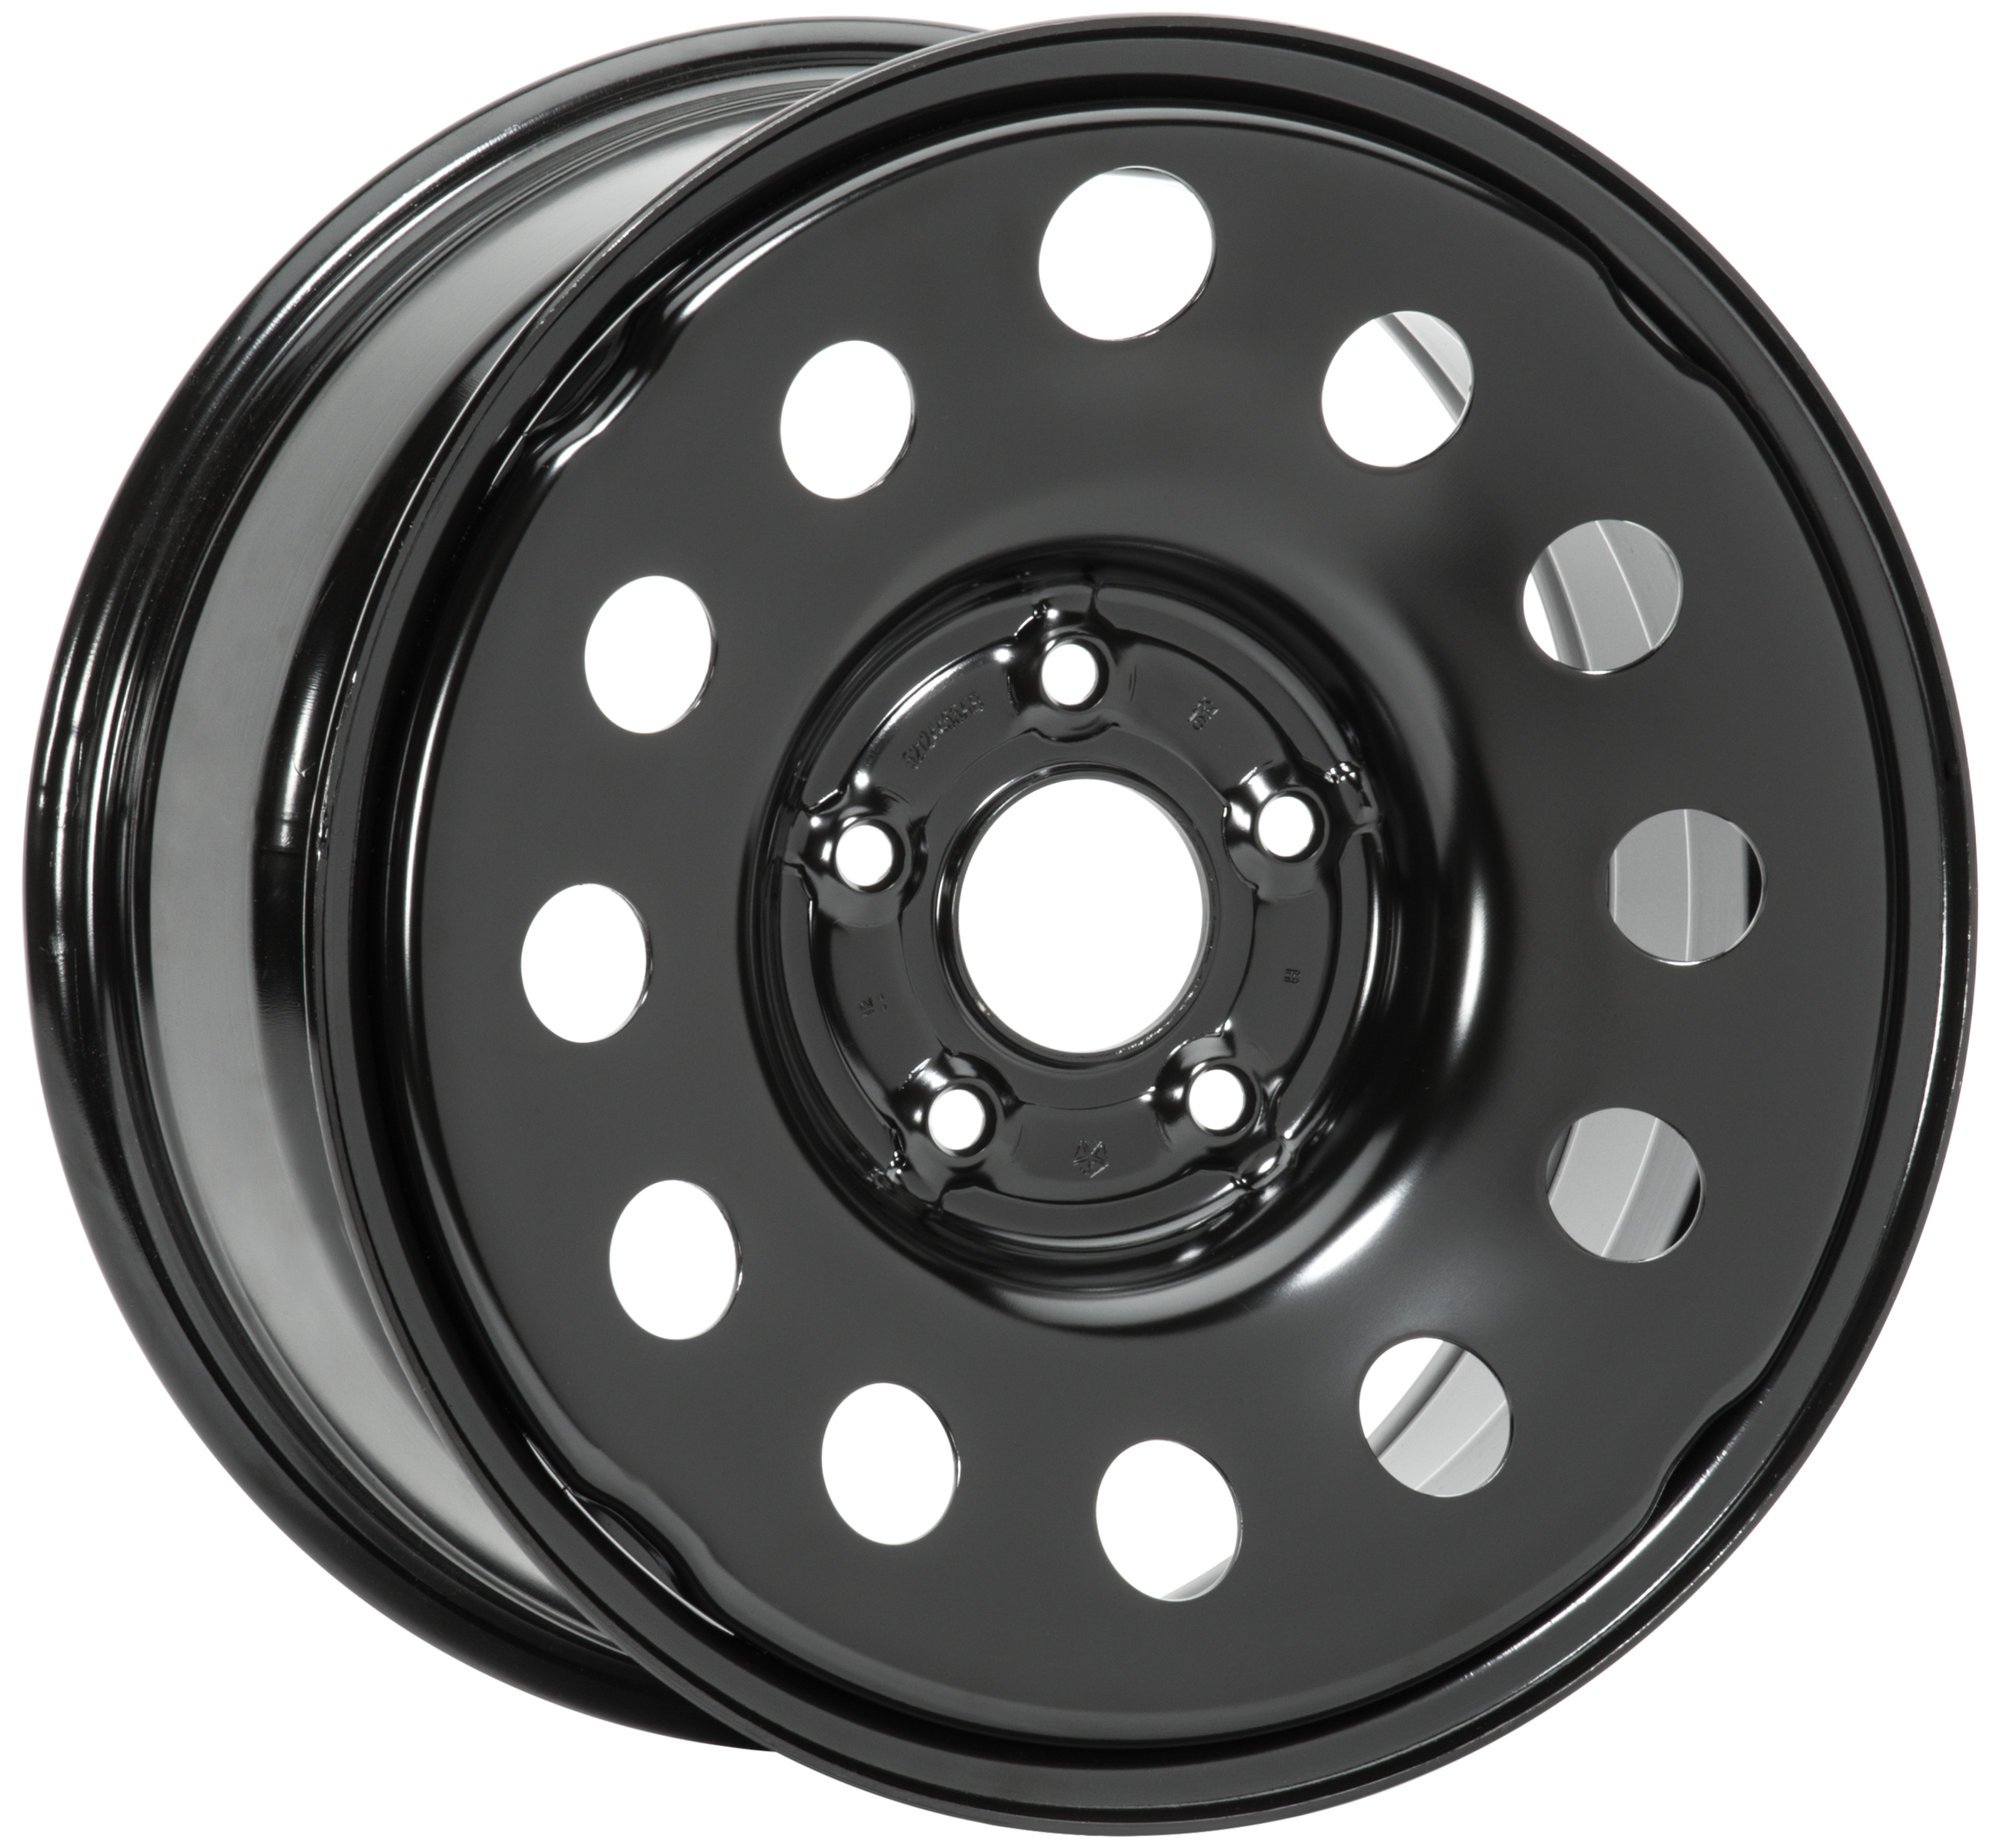 Mopar 52124455AB 17x7.5" Winter / Off-Road Steel Wheel for Jeep Vehicles  with 5x5 Bolt Pattern | Quadratec